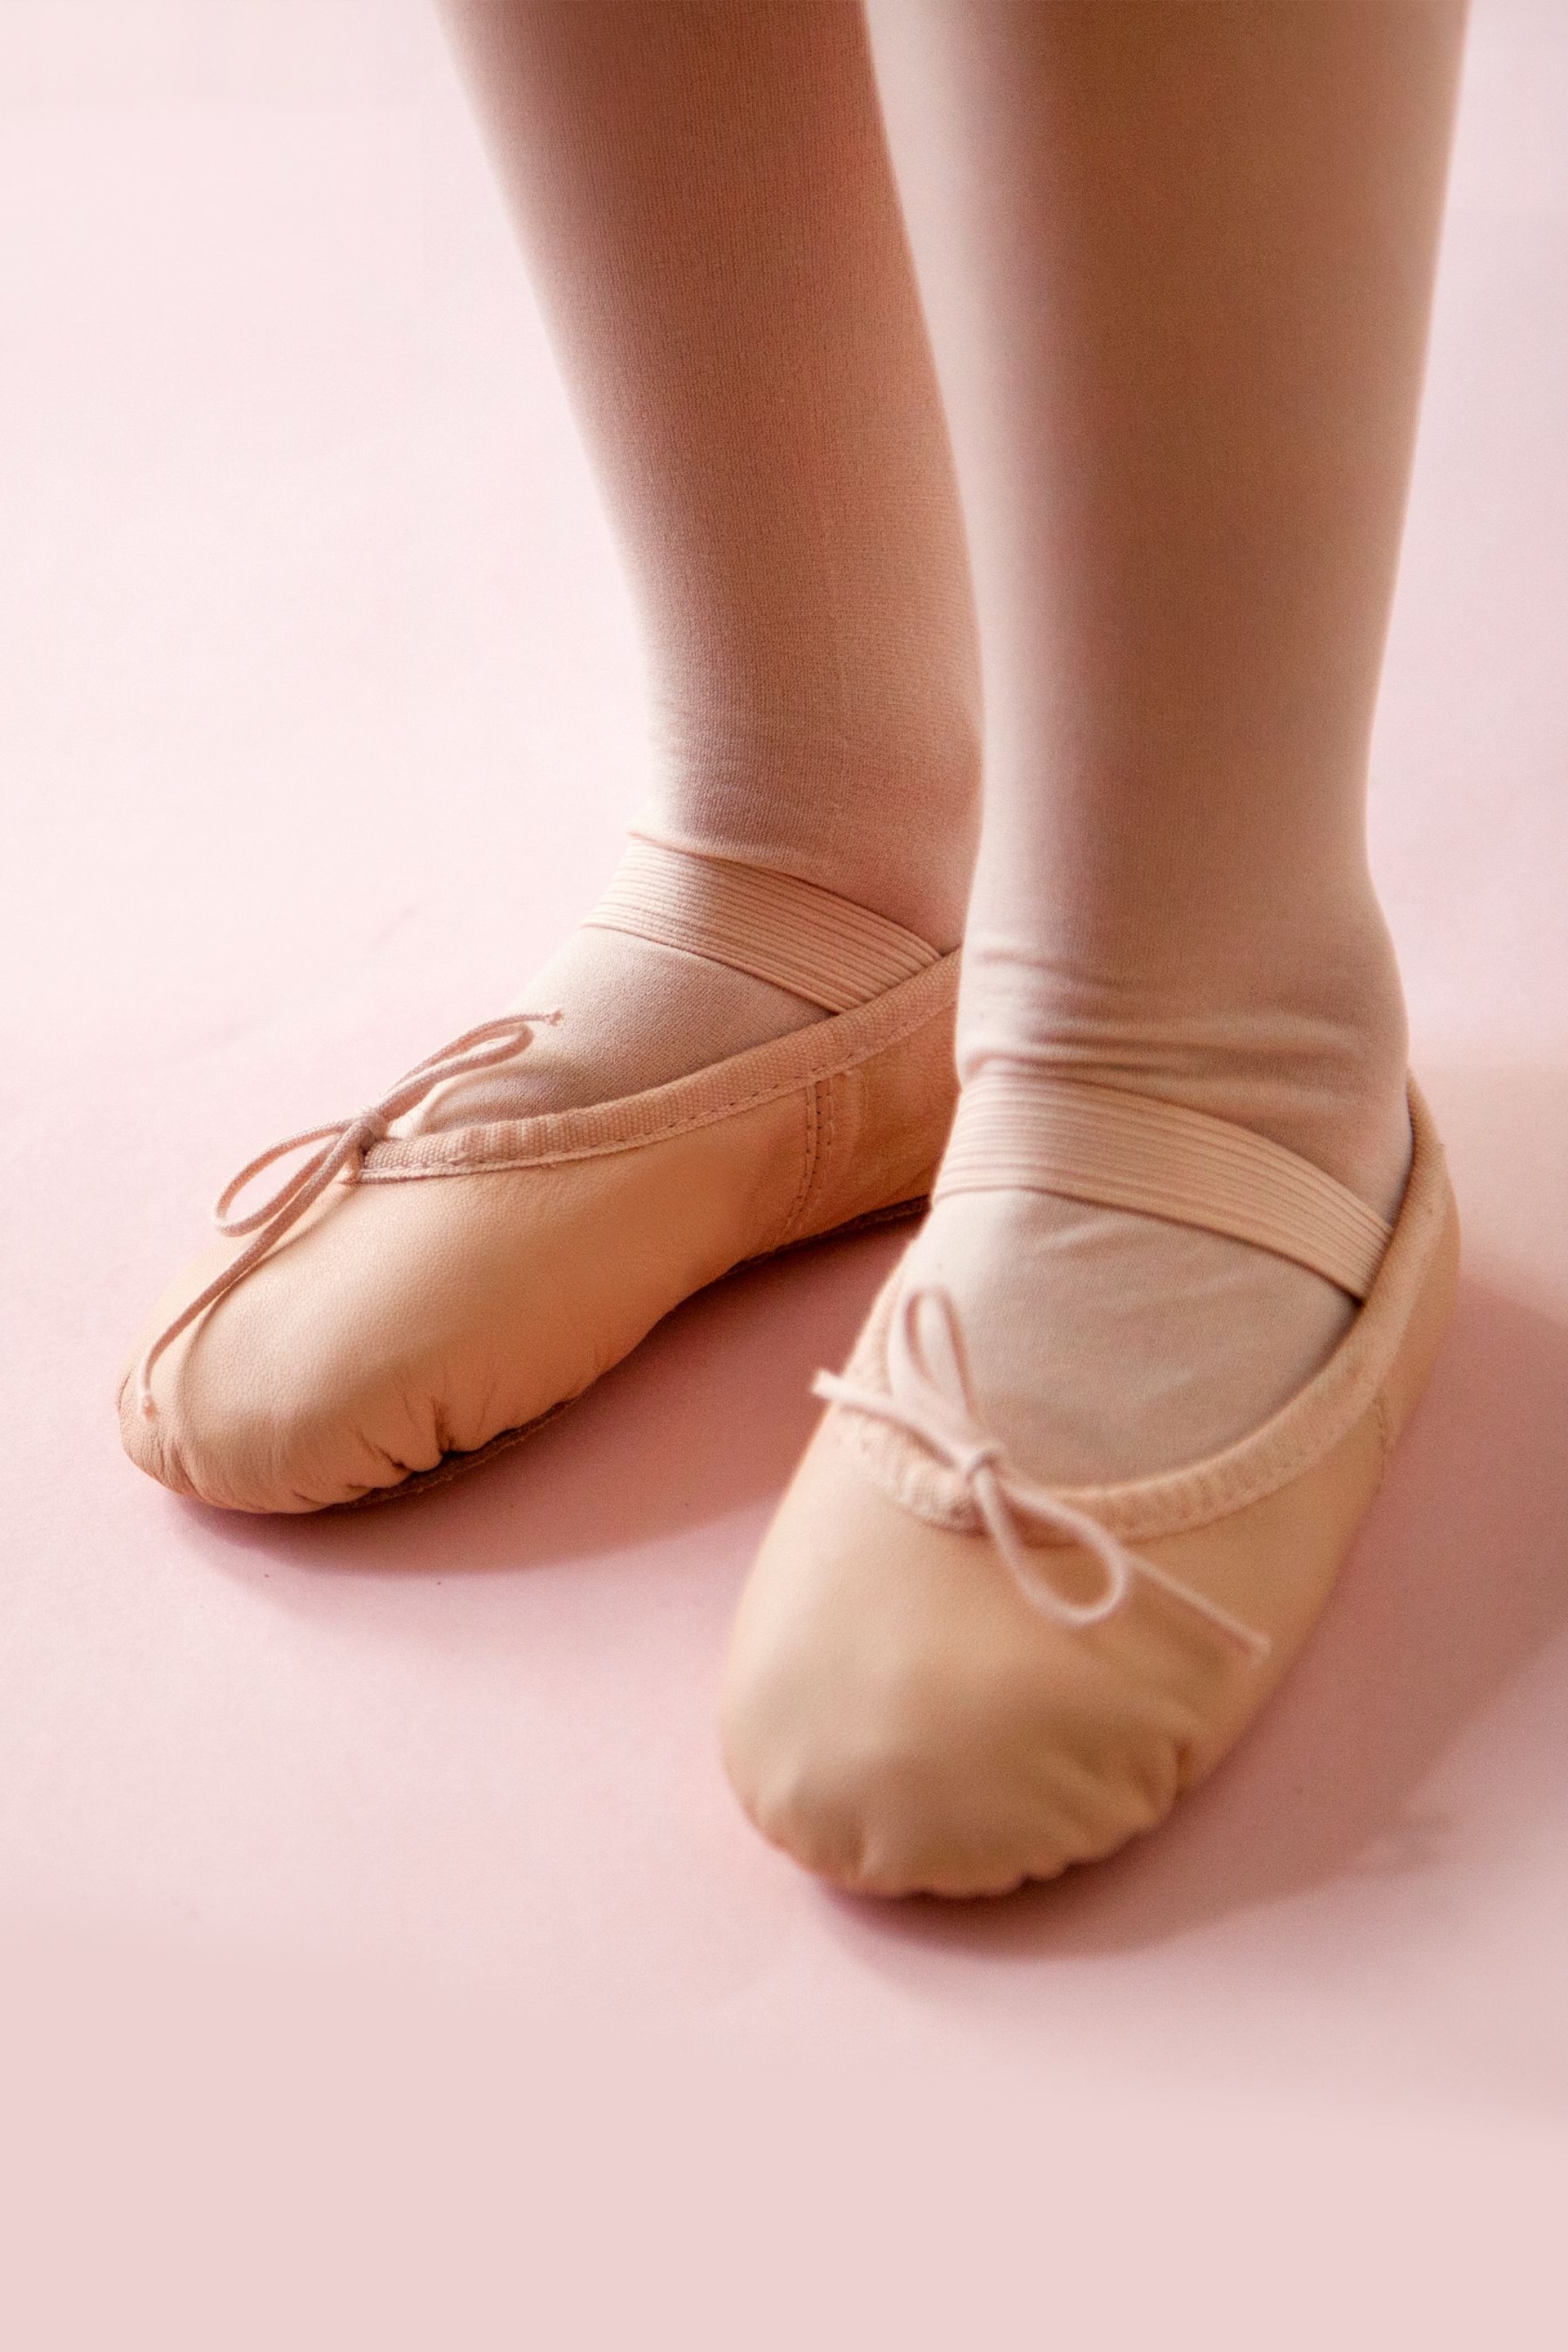 Trotters London Pink Bloch Ballet Shoes - Image 1 of 2